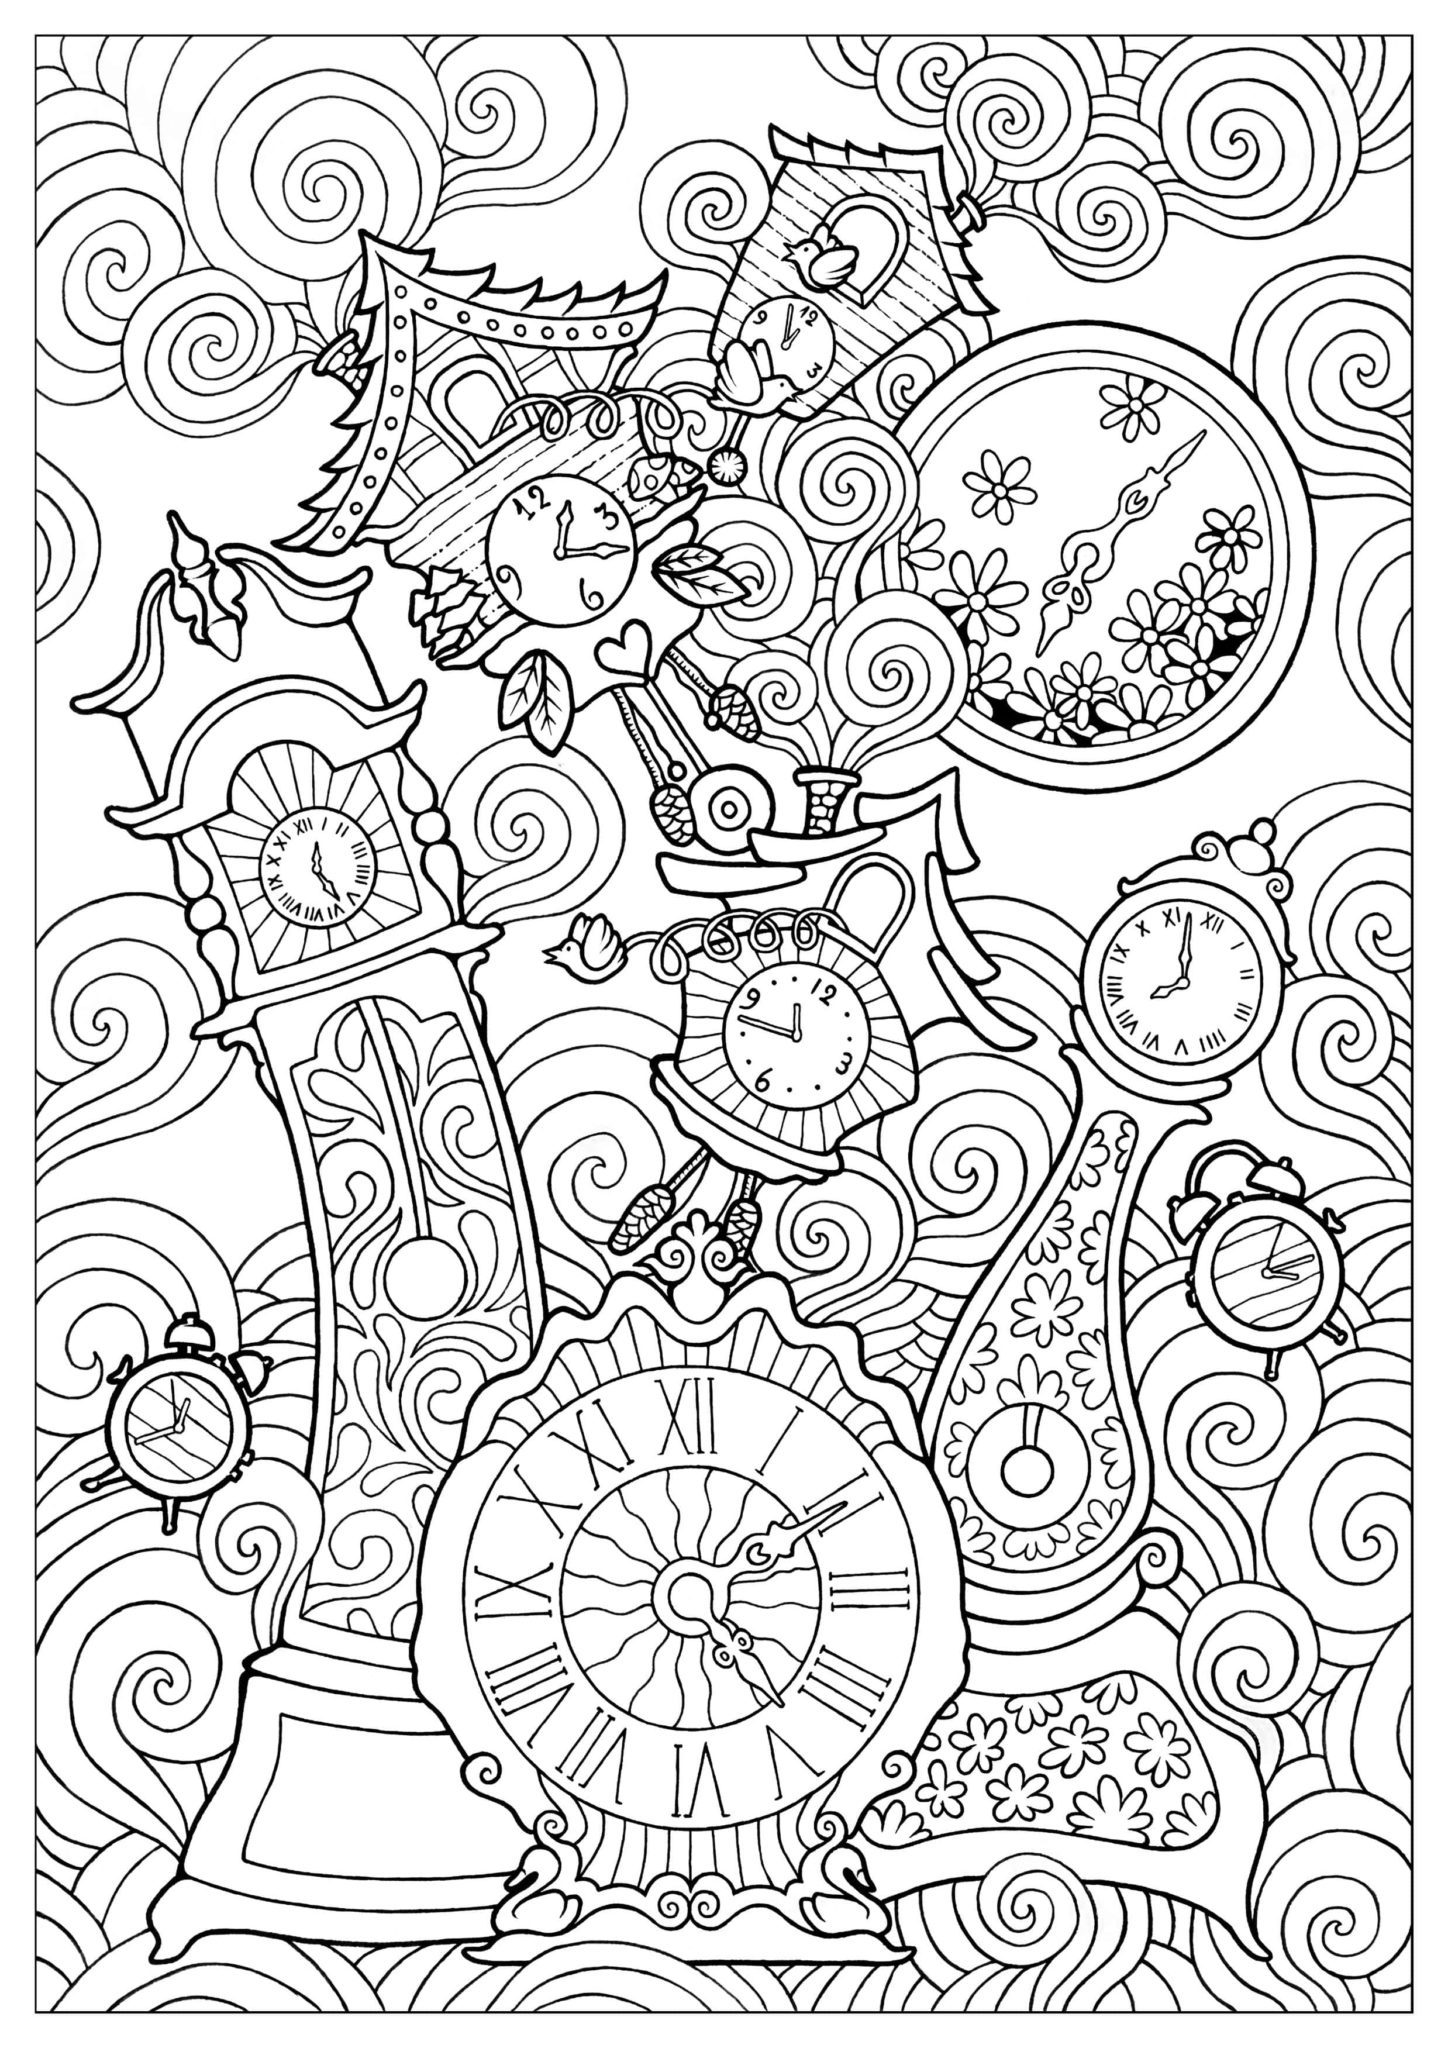 18 Adult Coloring Pages That Are Printable and Fun   Happier Human